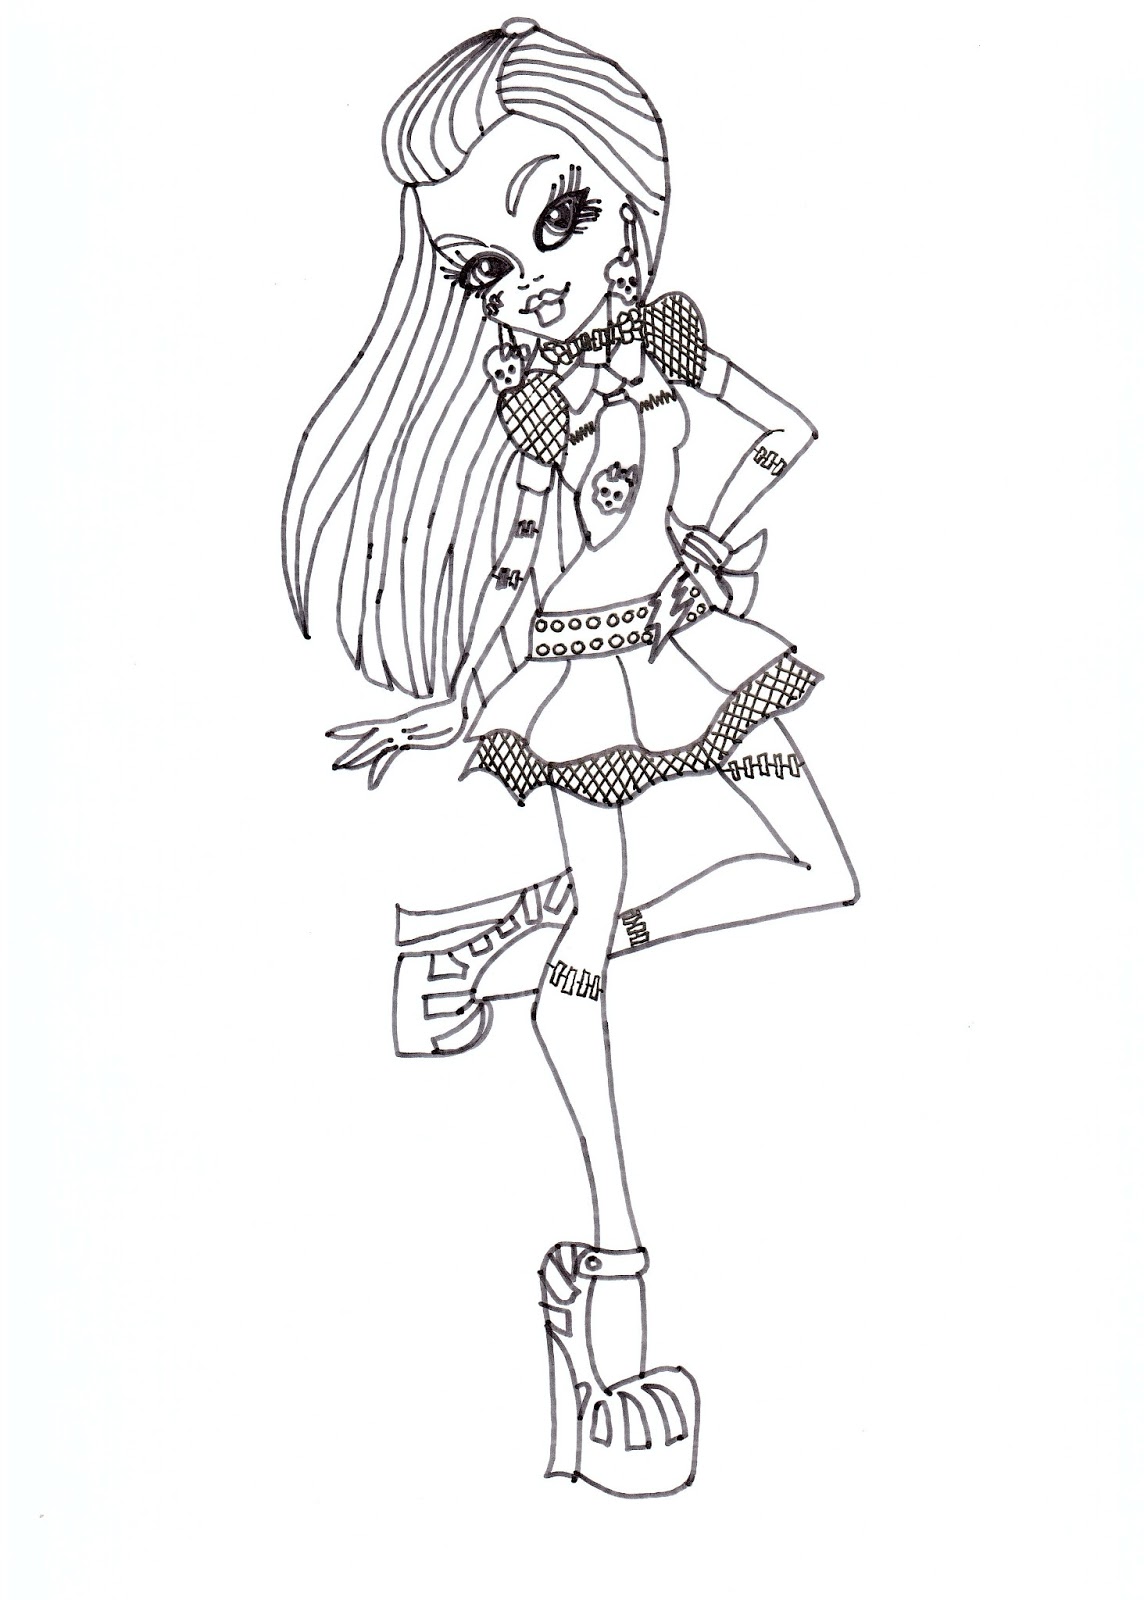 Download Free Printable Monster High Coloring Pages: Frankie Stein Coloring Sheet